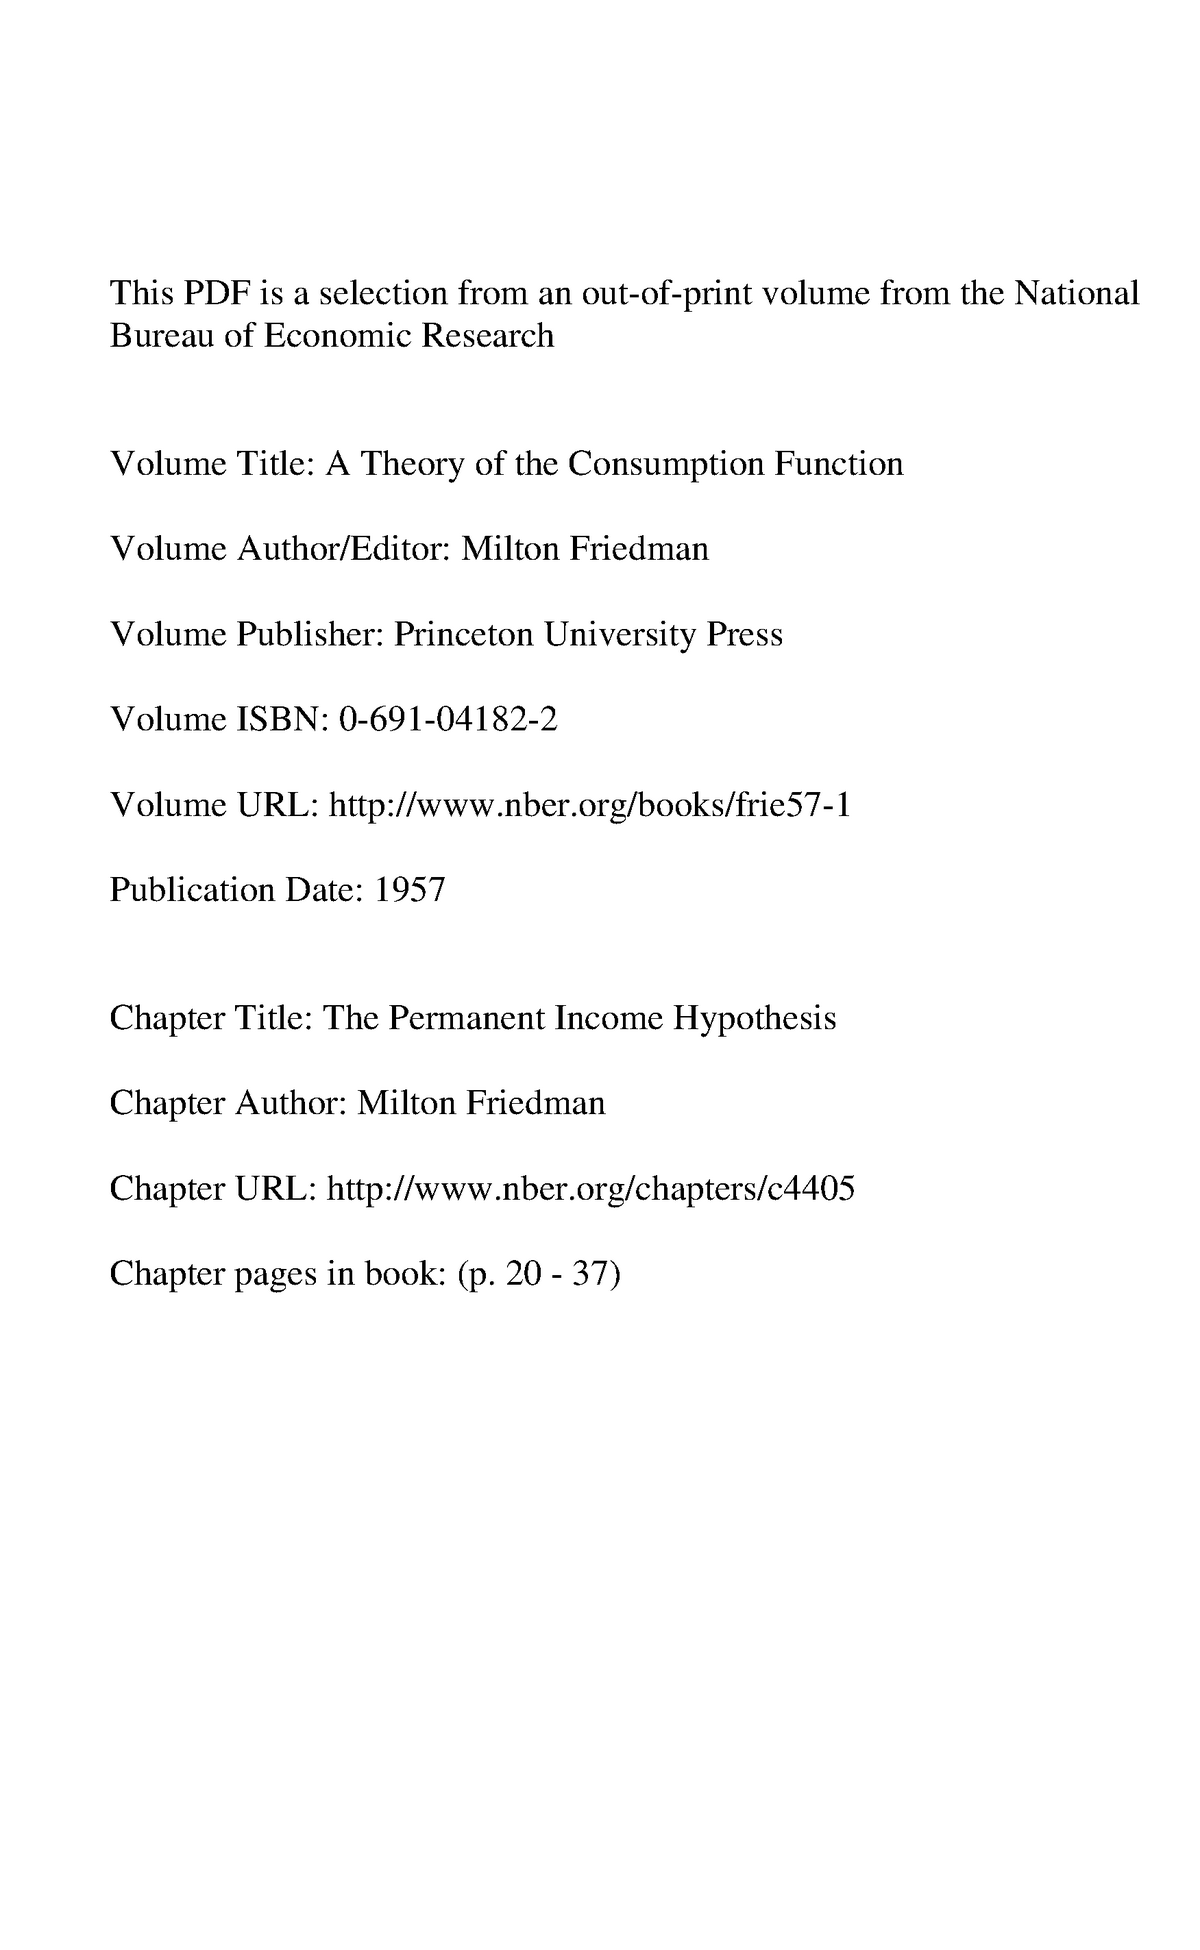 permanent income hypothesis lecture notes pdf